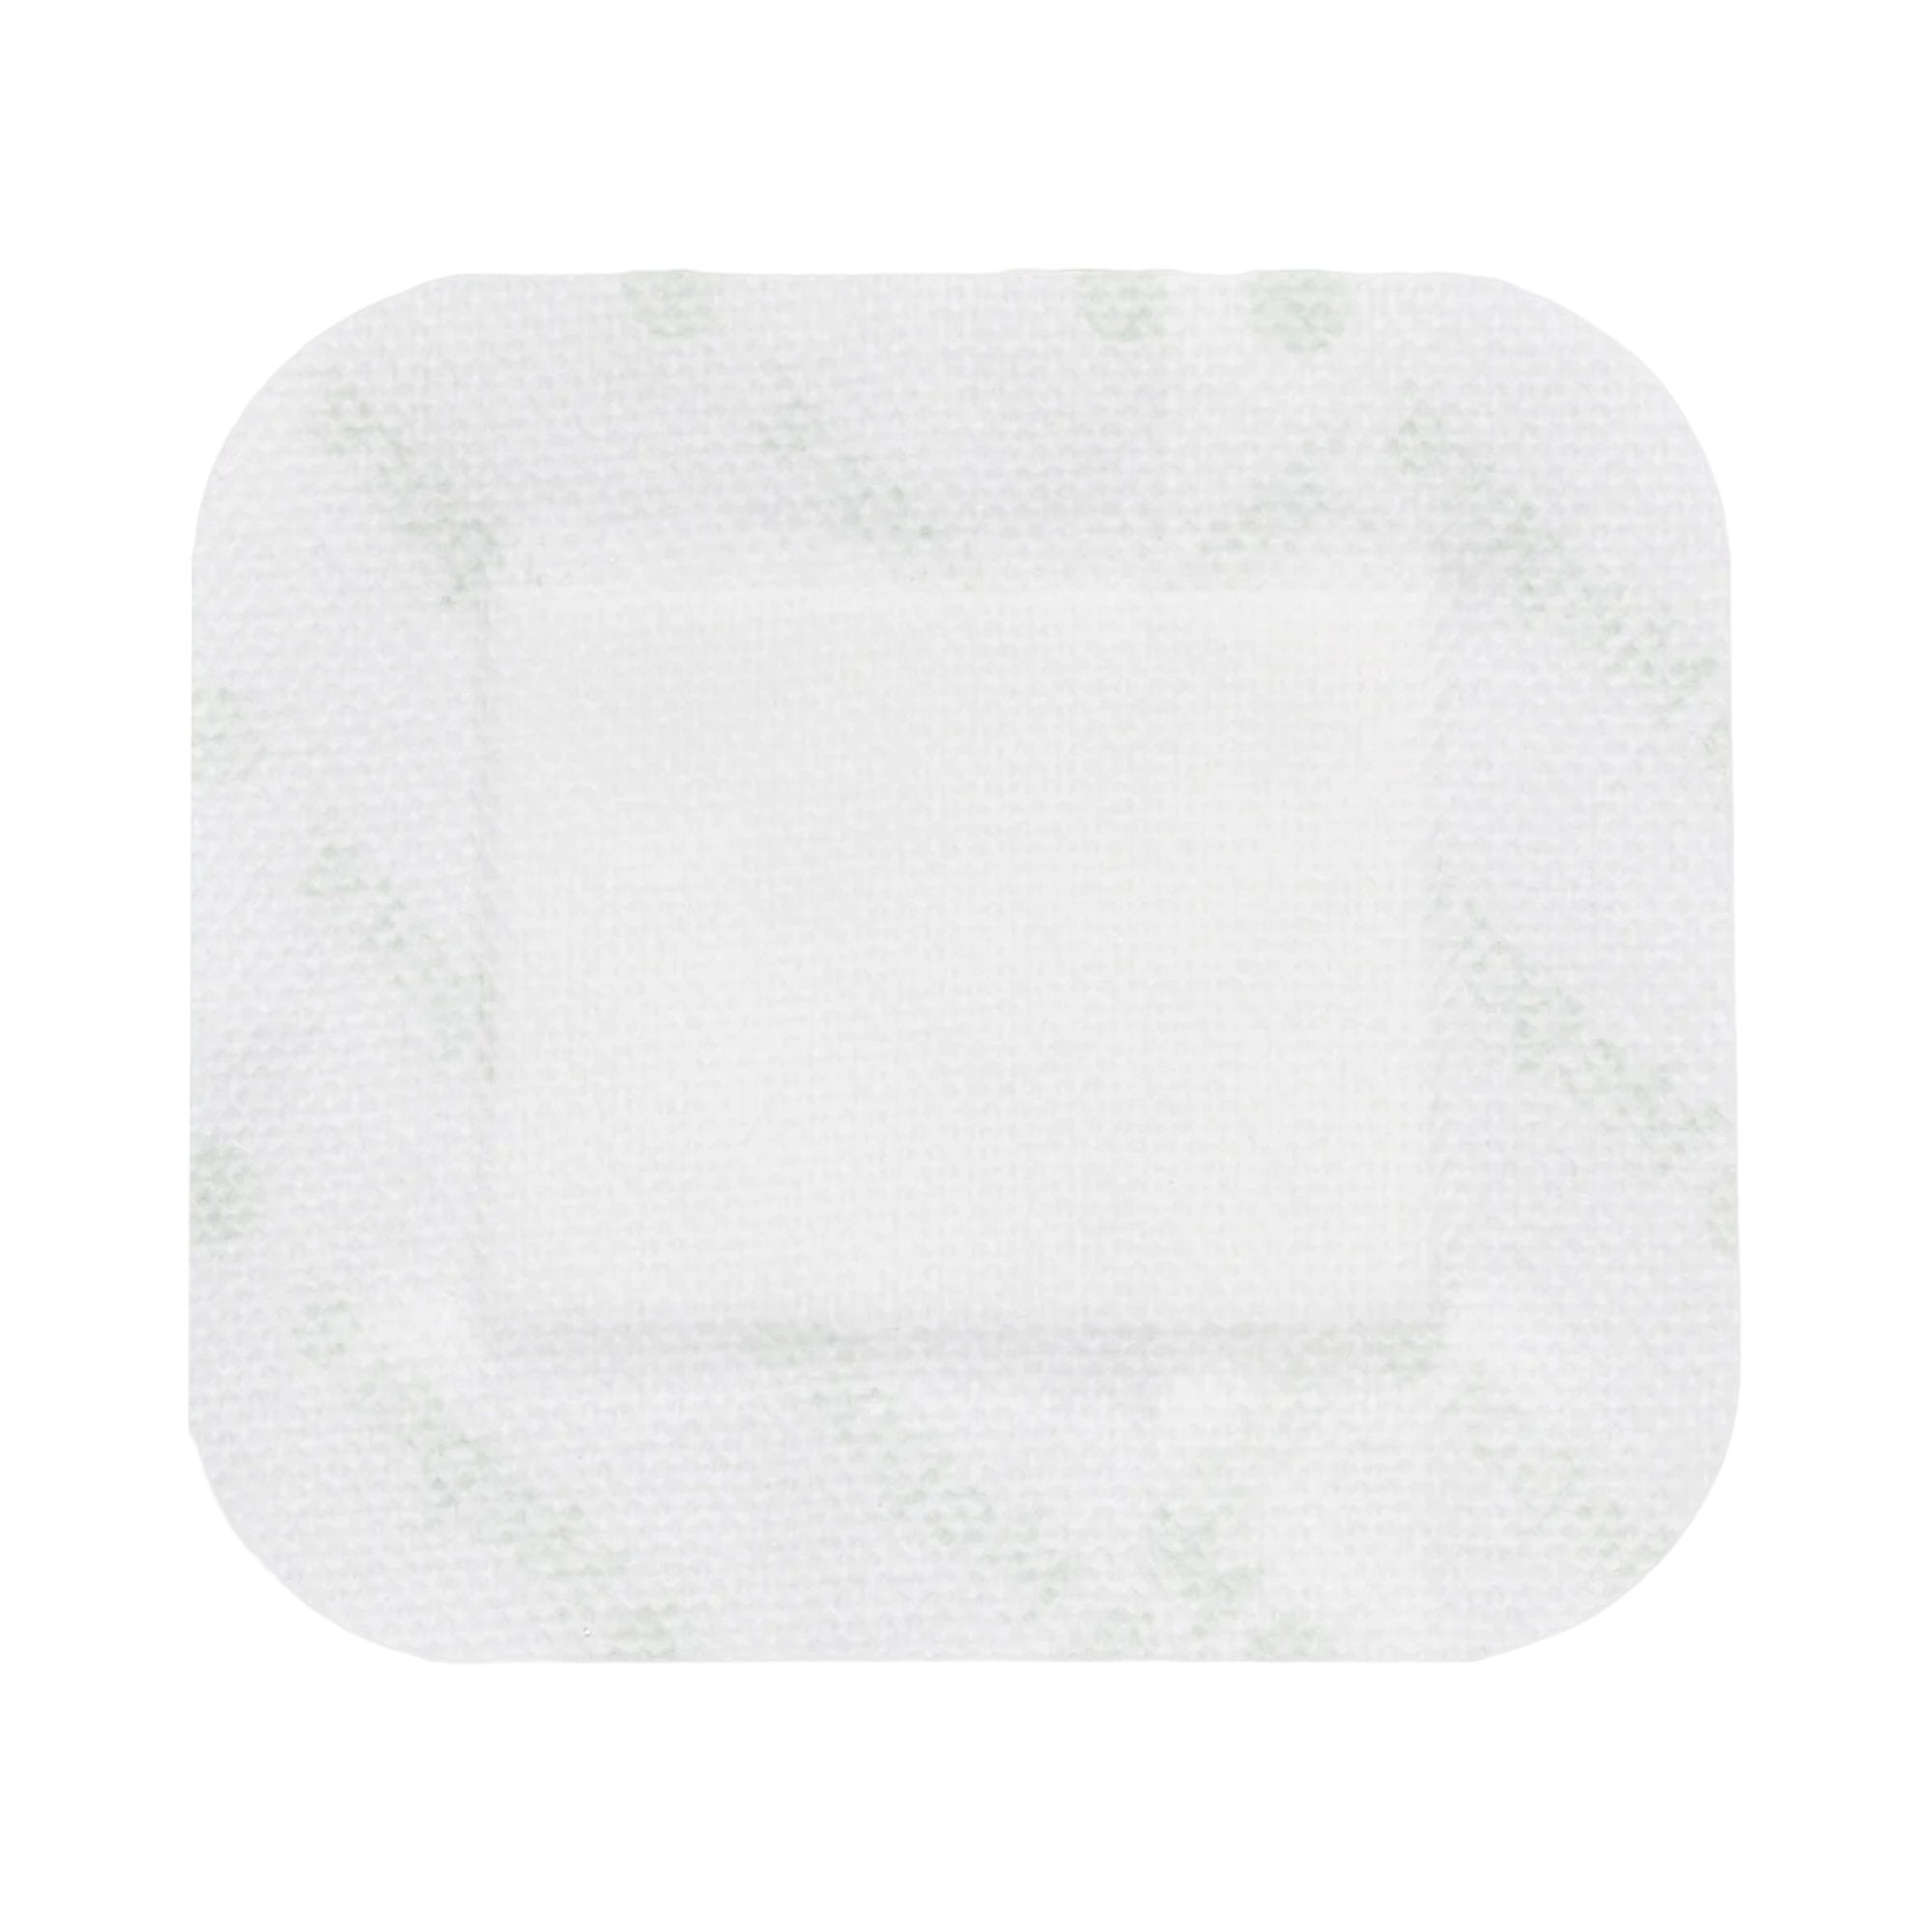 Adhesive Dressing Mepore® 3-3/5 X 8 Inch Nonwoven Spunlace Polyester Rectangle White Sterile